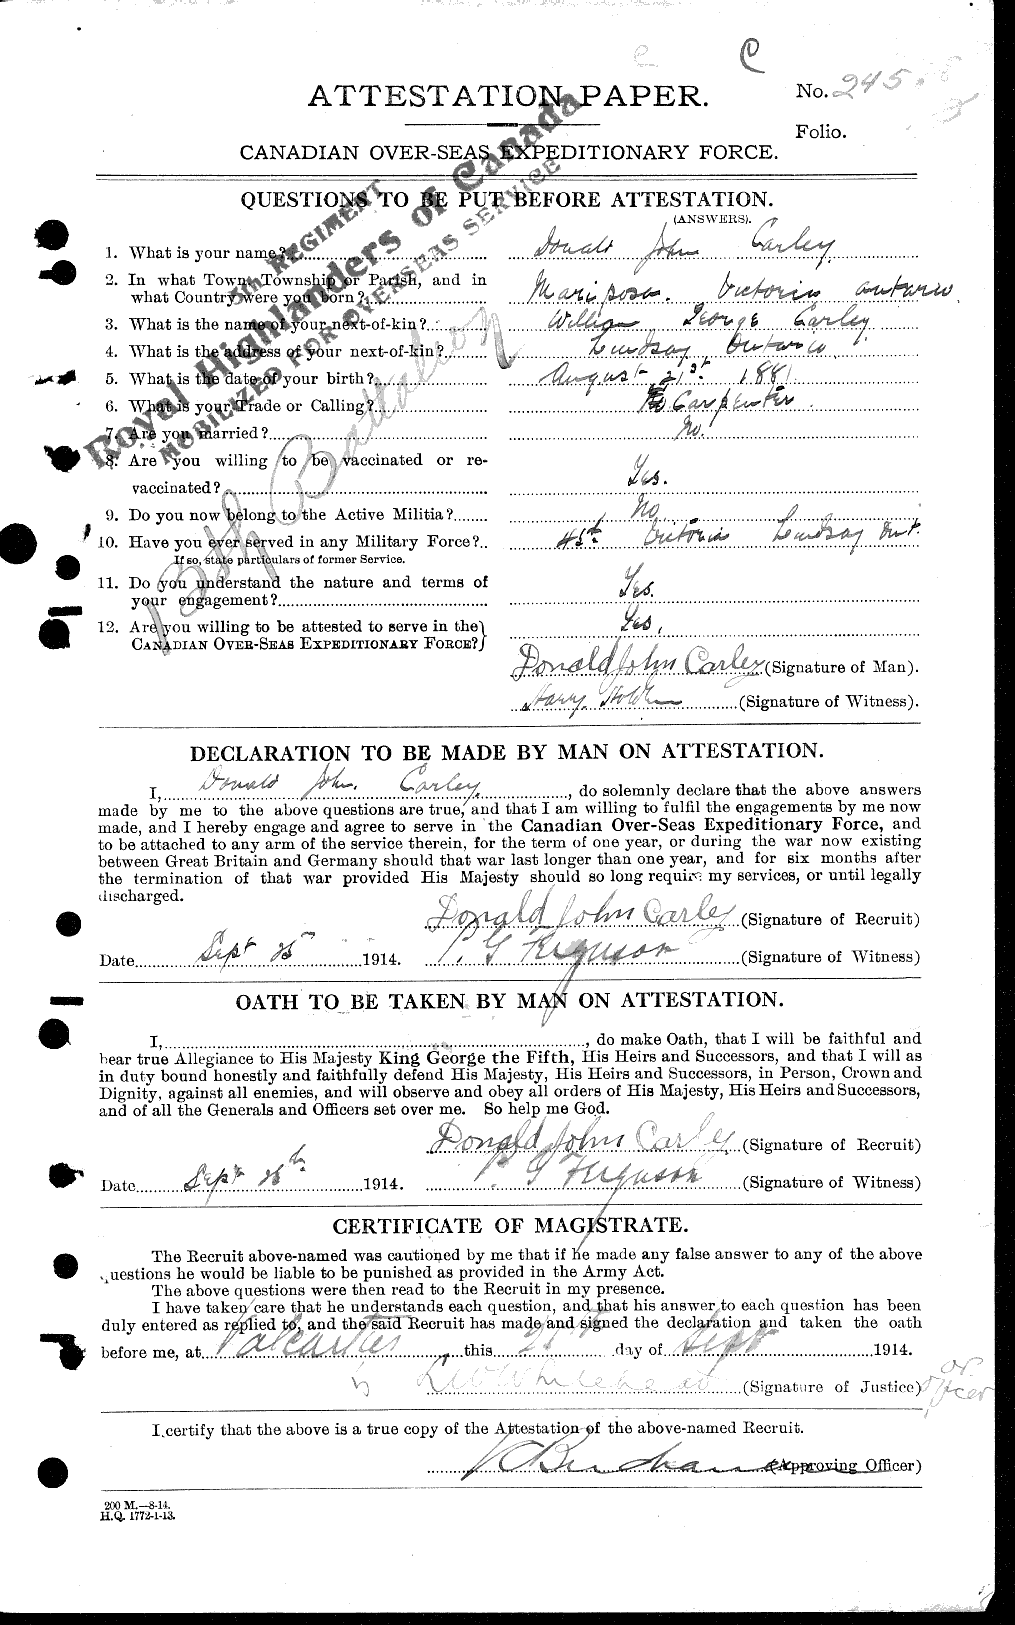 Personnel Records of the First World War - CEF 009603a